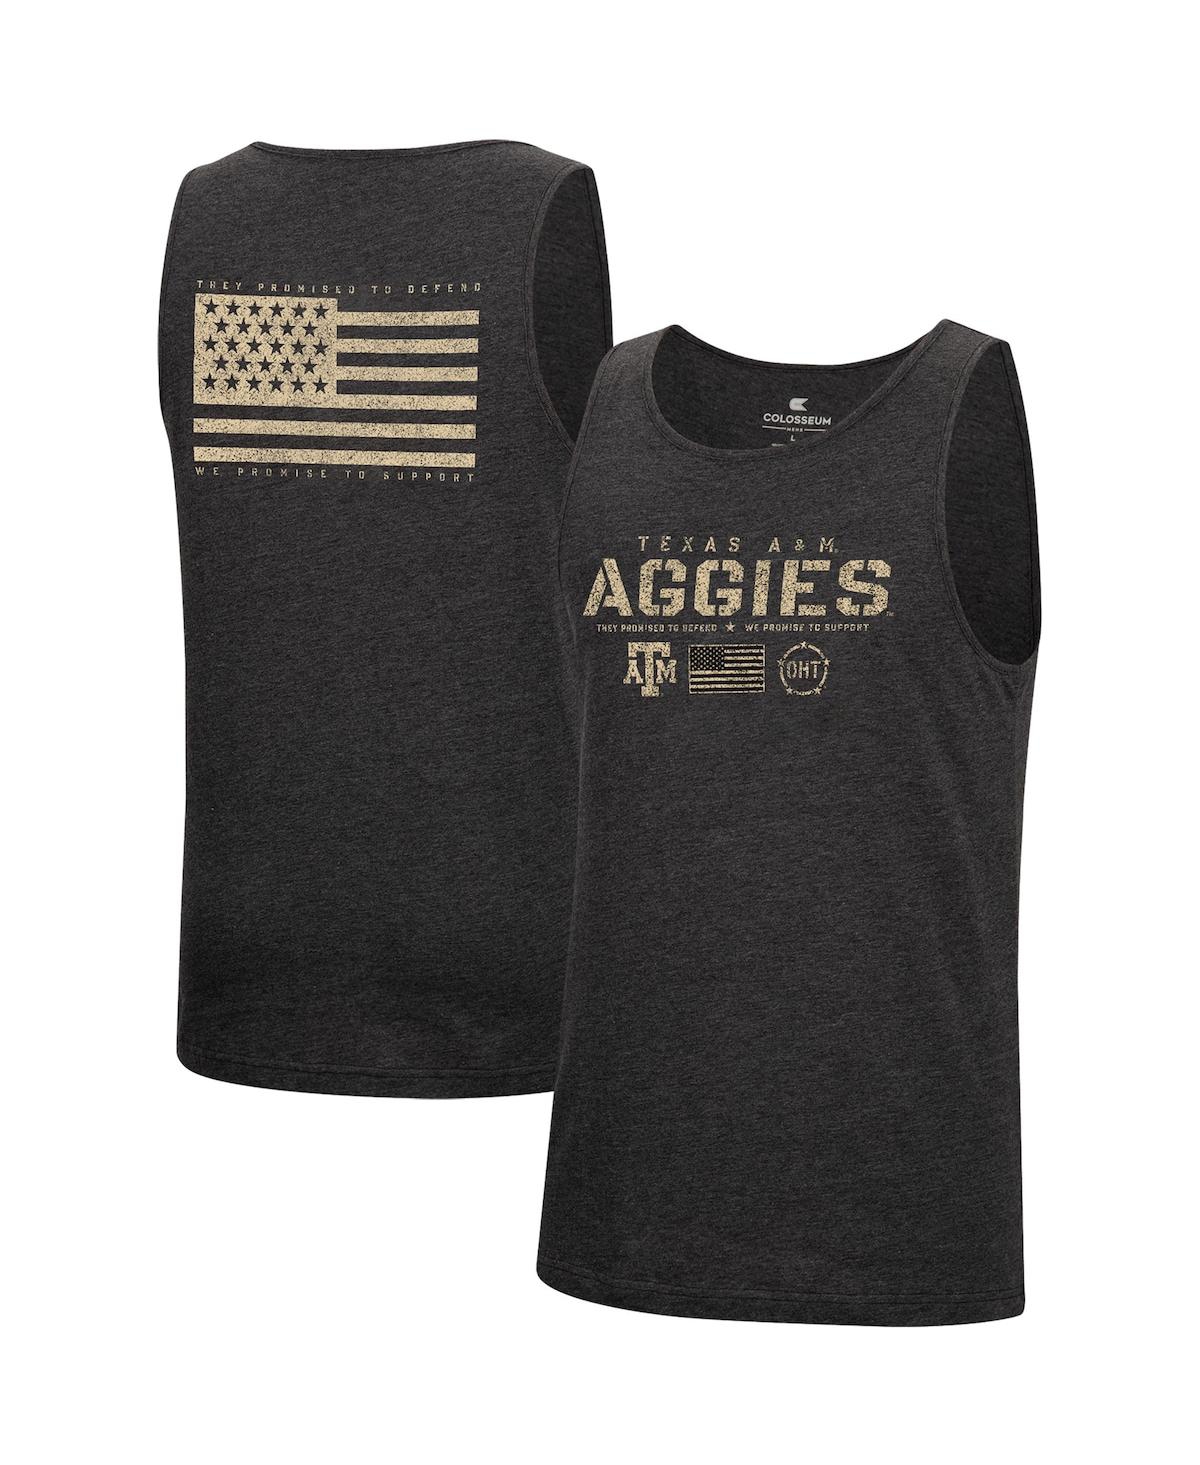 Men's Colosseum Heathered Black Texas A&M Aggies Military-Inspired Appreciation Oht Transport Tank Top - Heathered Black